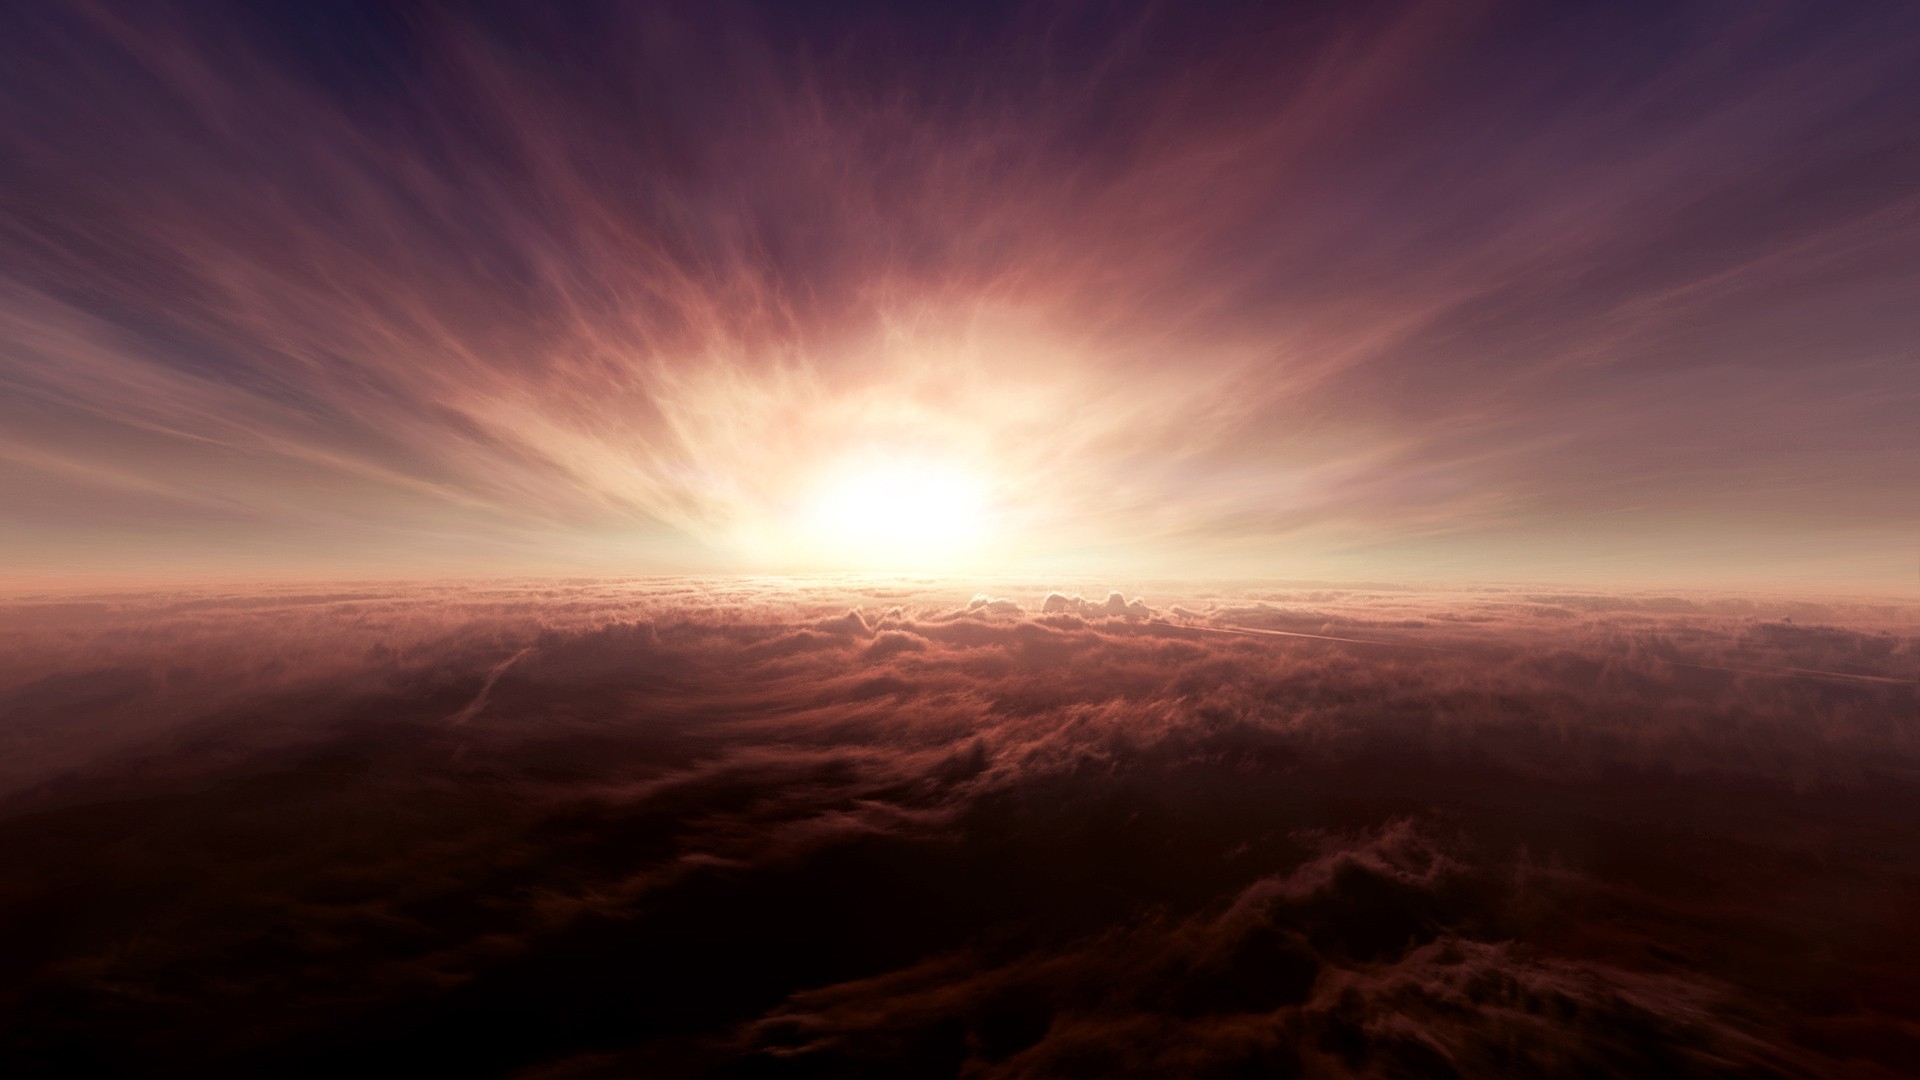 Wallpapers wallpaper beyond the clouds sky sun rays on the desktop